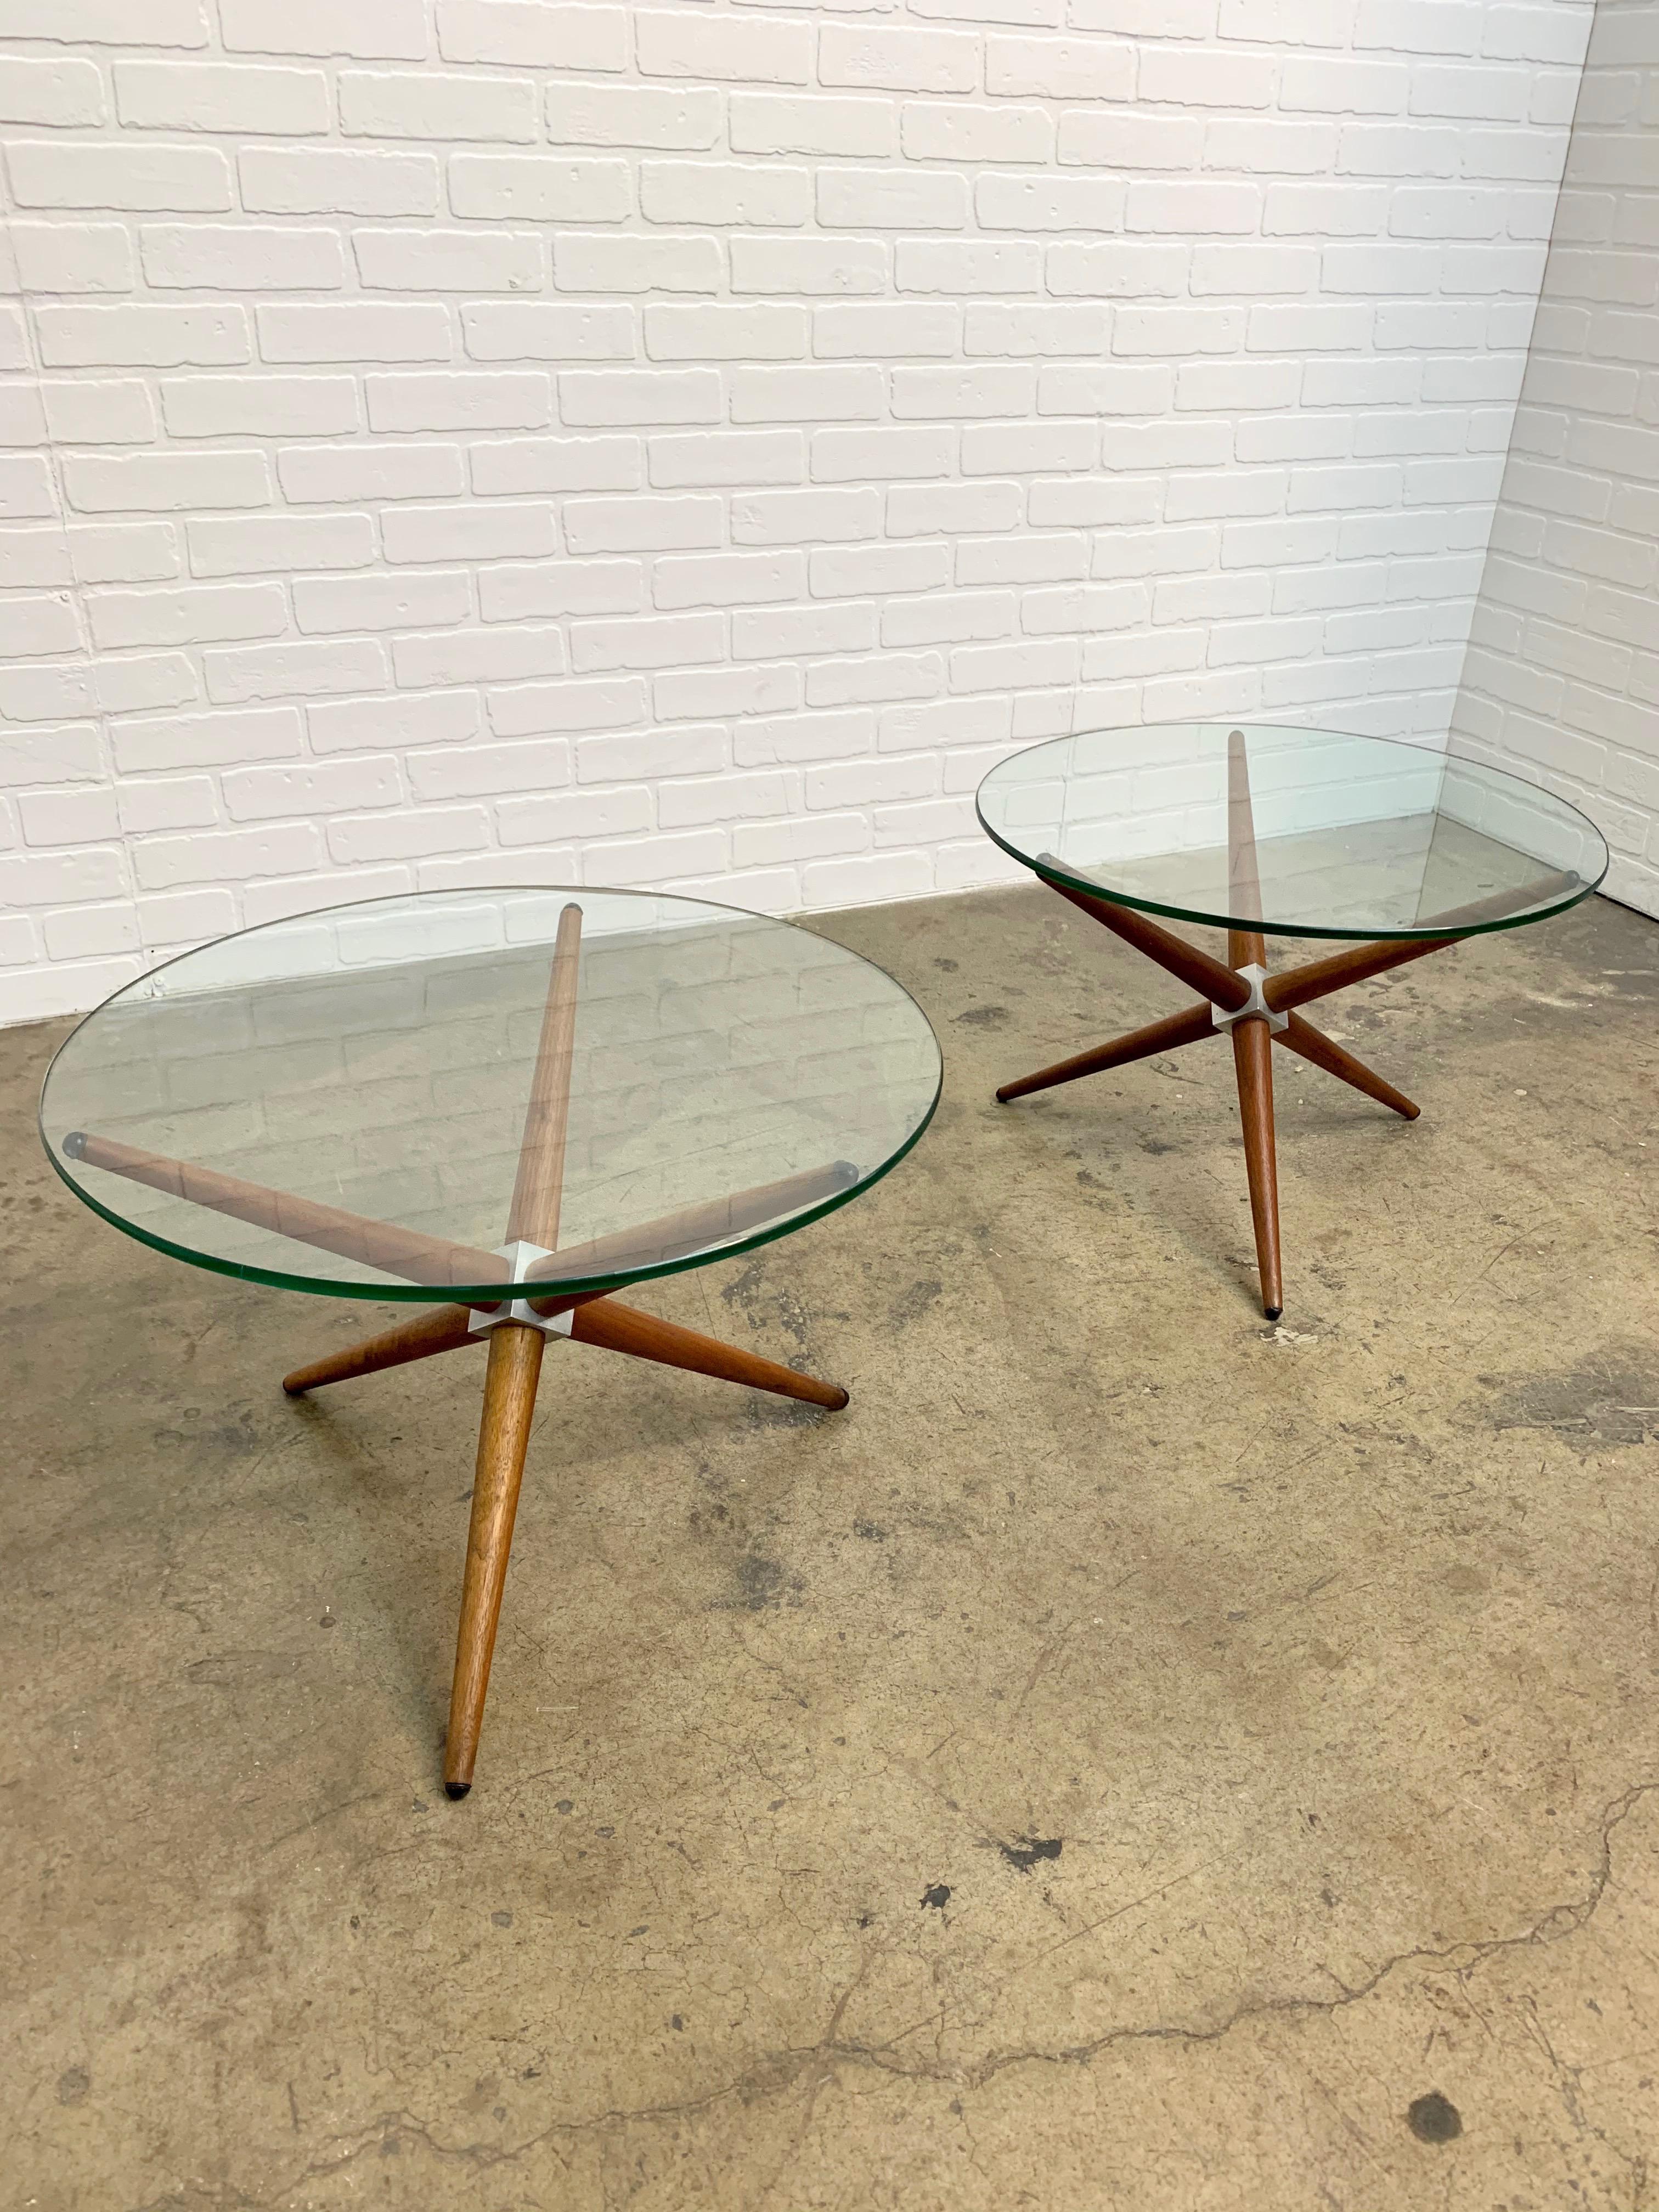 North American Midcentury Jax Style End Tables of Walnut and Aluminum